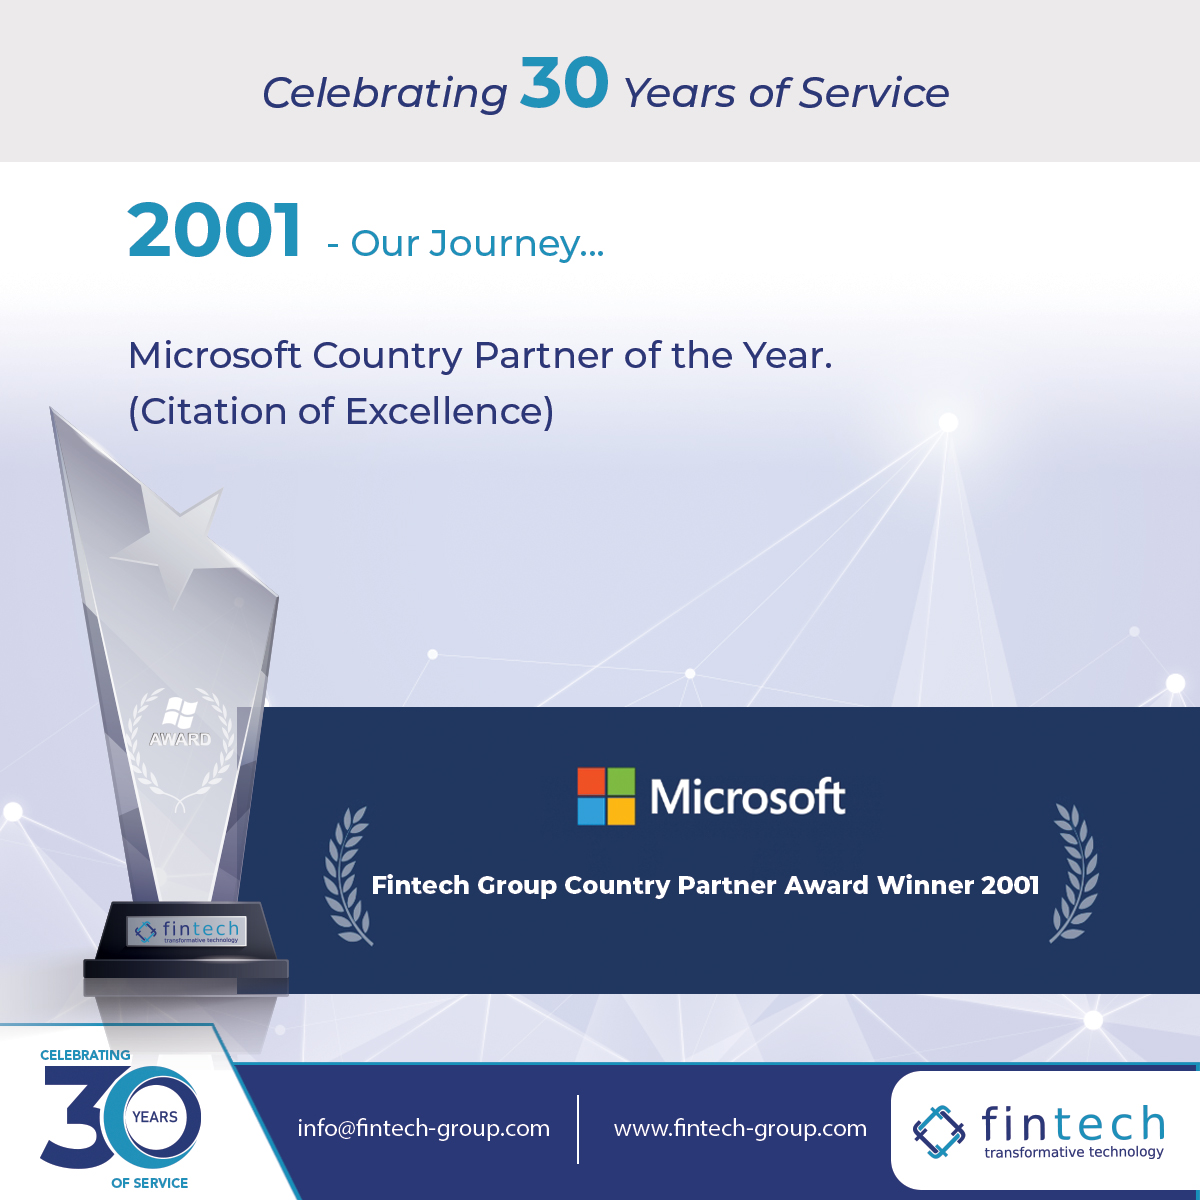 Fintech Group was honored among a global field of top Microsoft Partners for African countries demonstrating excellence in innovation and implementation of customer solutions based on Microsoft Technology in 2001 #microsoftpartner #microsoftcertification #microsoft #fintech